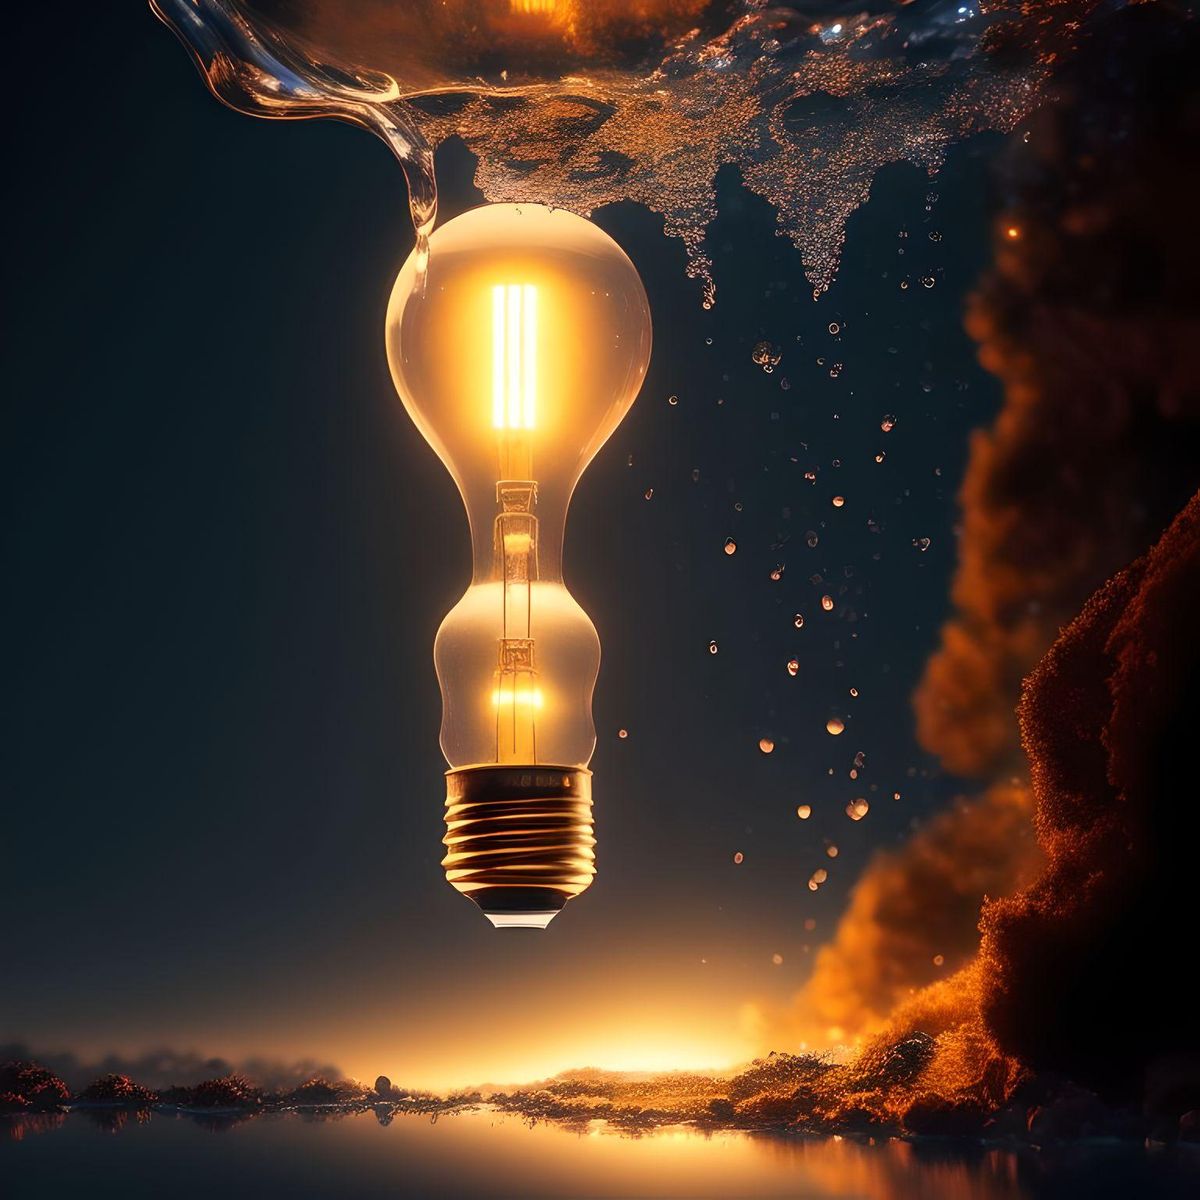 photorealistic idea Lightbulb splashed from behind with +water , highRes, landscape, dark objectless background, multiple lightsources